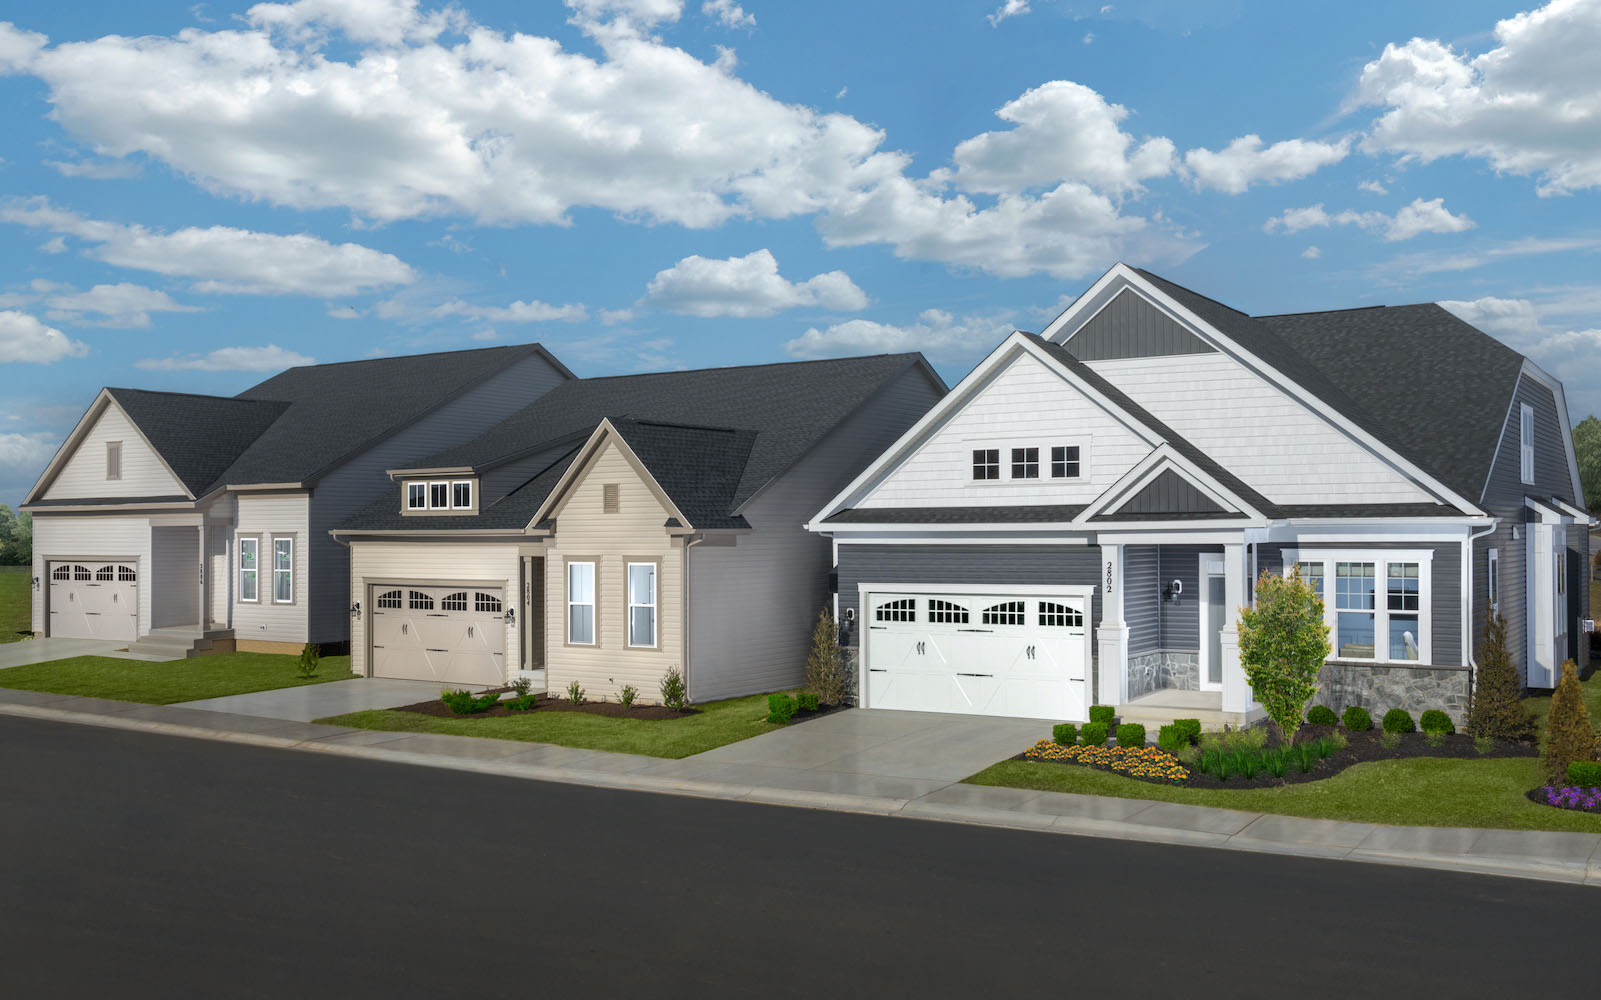 New 55+ Single Family Homes in Bristow, VA | Crest at Linton Hall ...